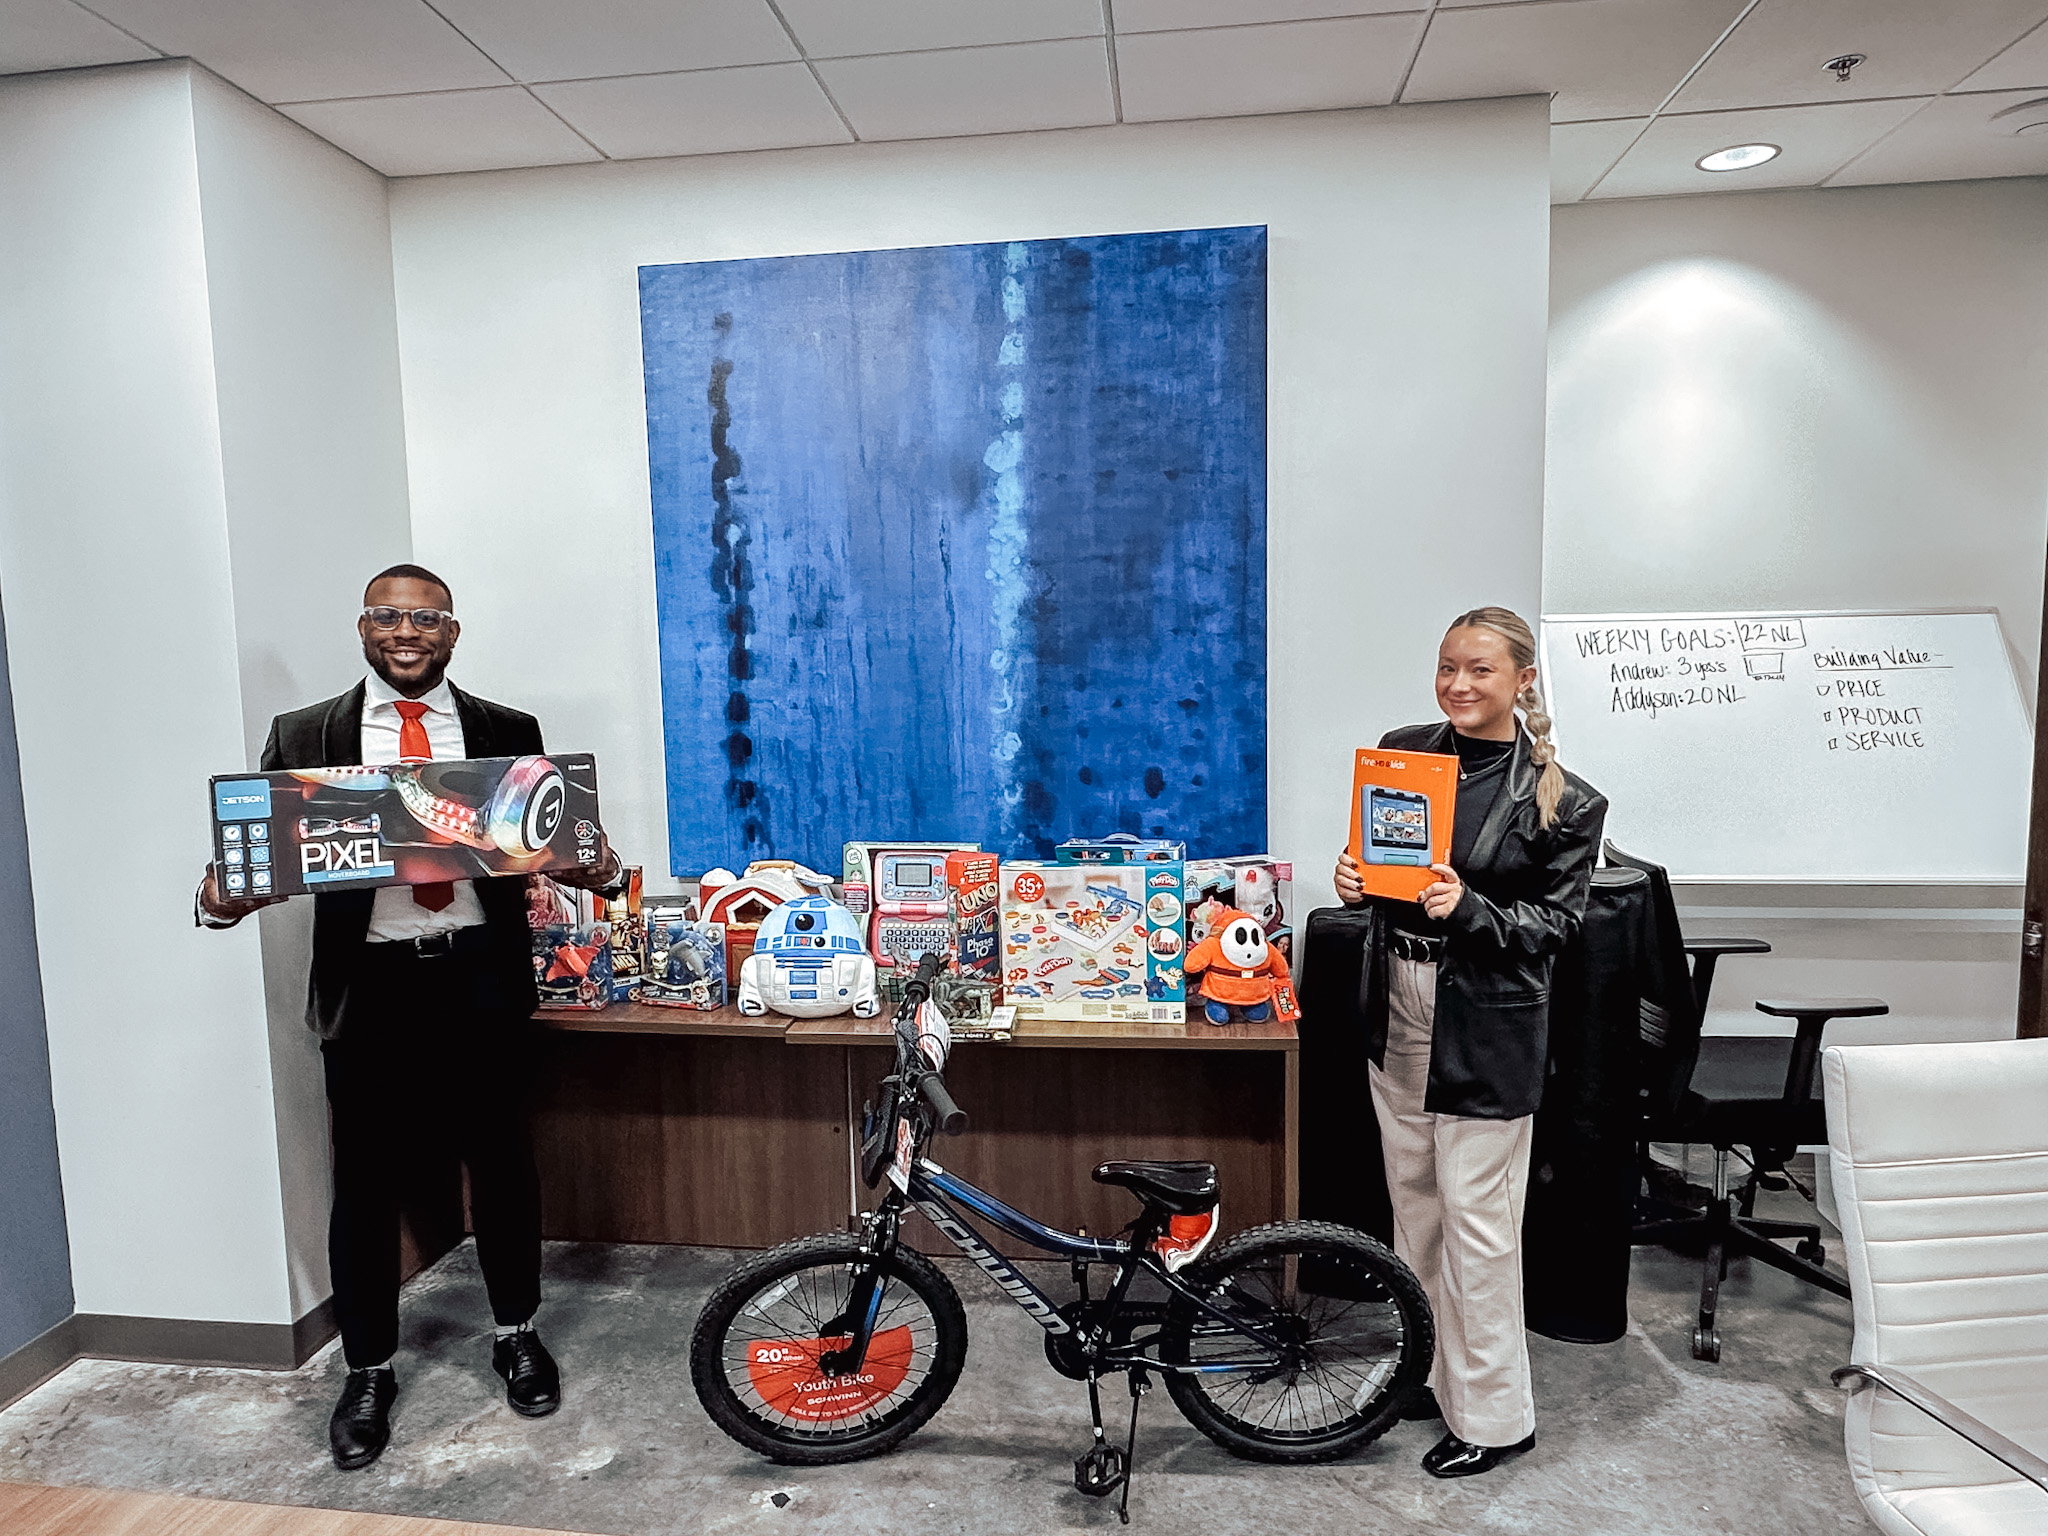 Acquire Demonstrates Holiday Spirit by Generously Donating to Salvation Army